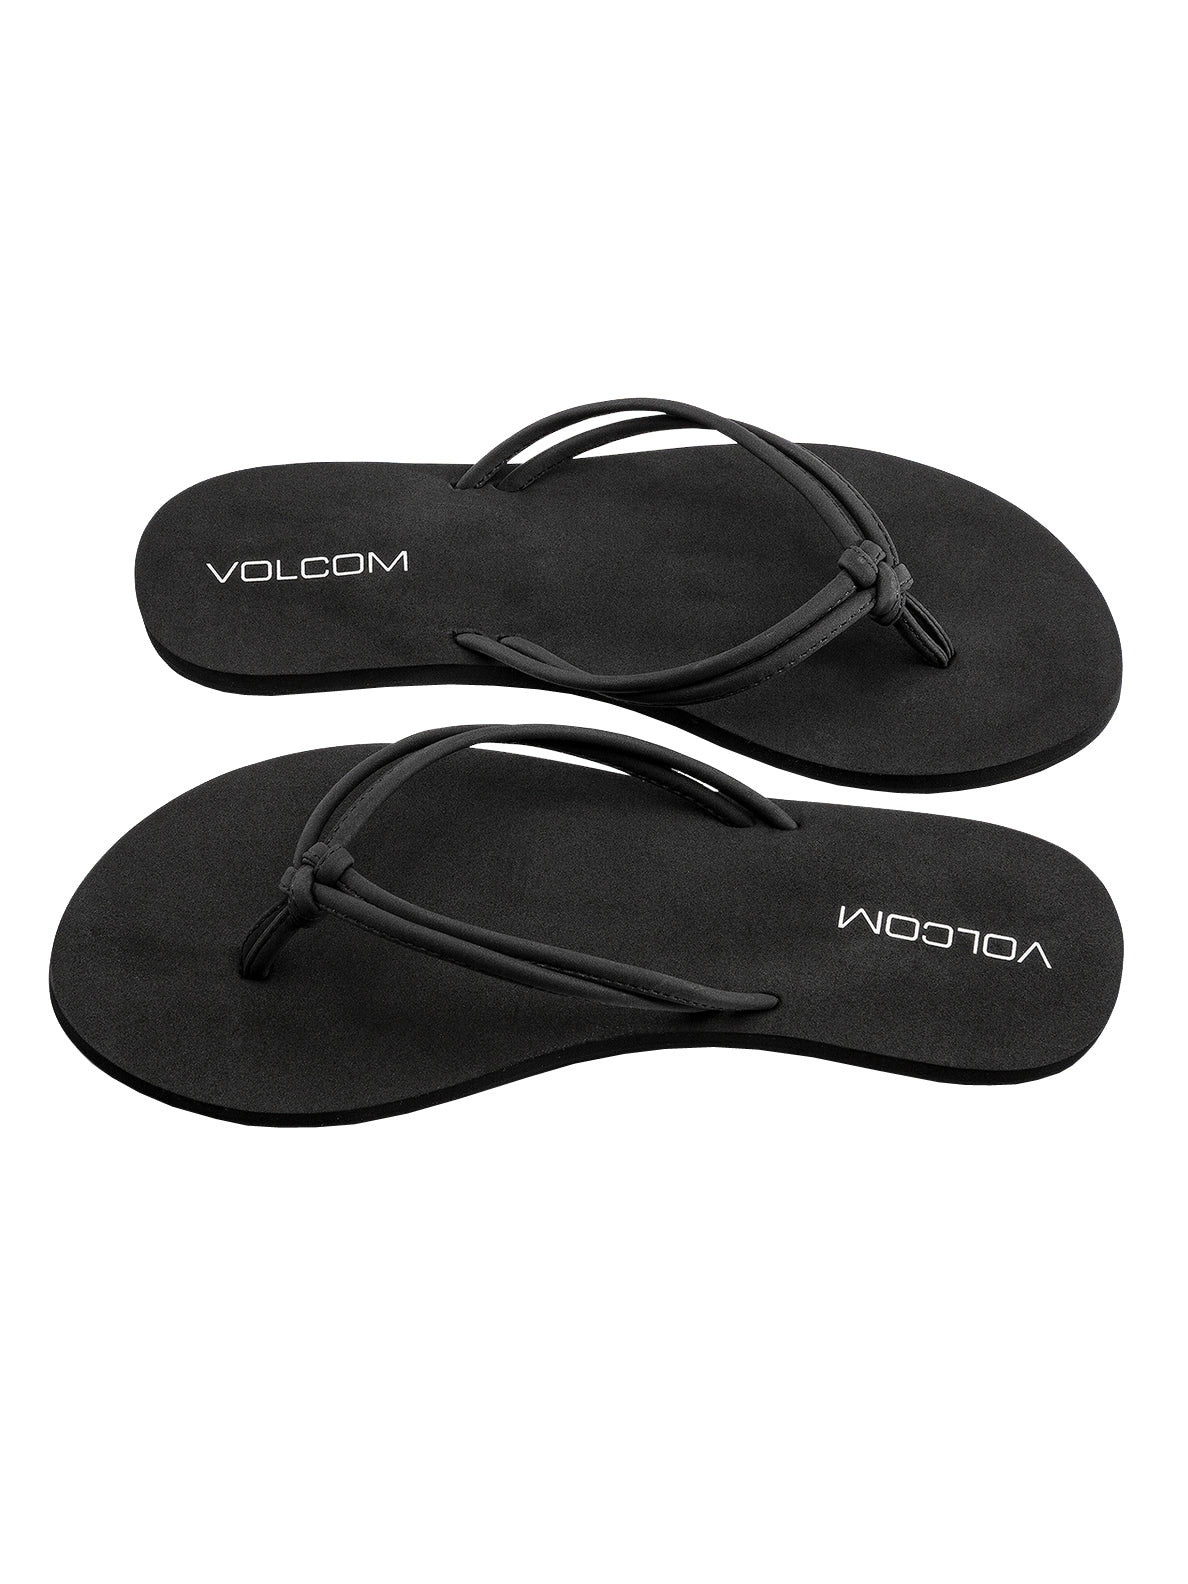 Volcom Forever and Ever 2 Womens Sandal BKO23-Black Out 11